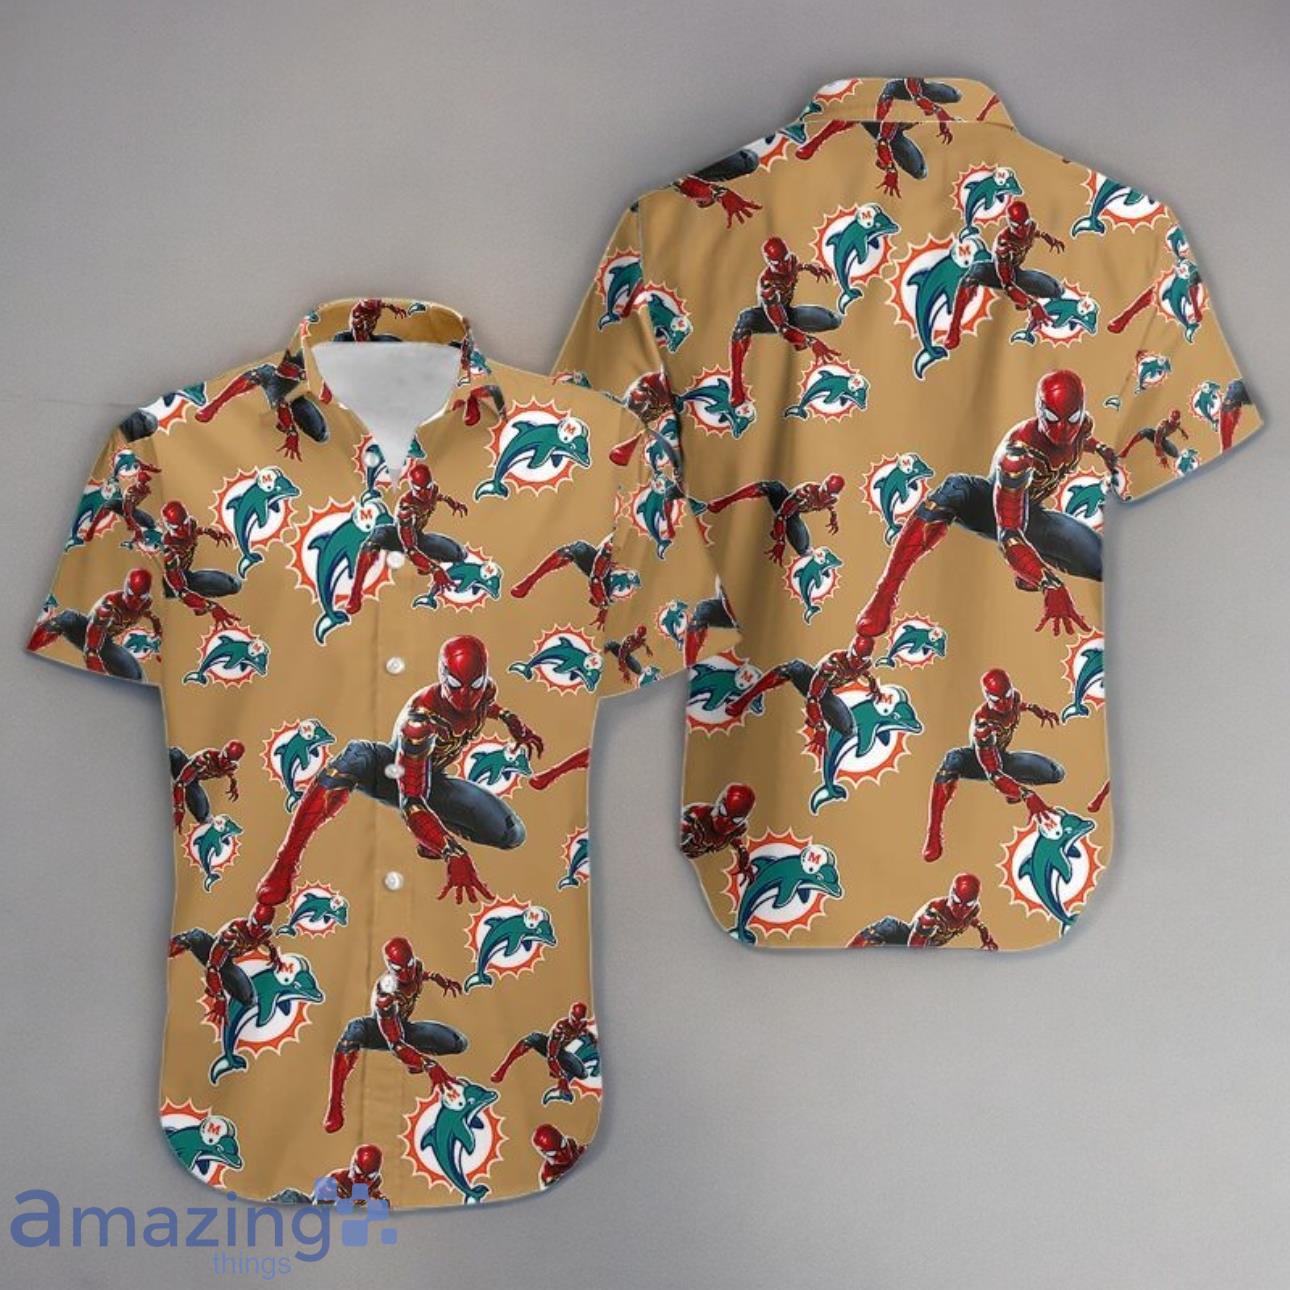 Spiderman Exclusive Avengers Fashion Hawaiian Camp Shirt Miami Dolphins Nfl Product Photo 1